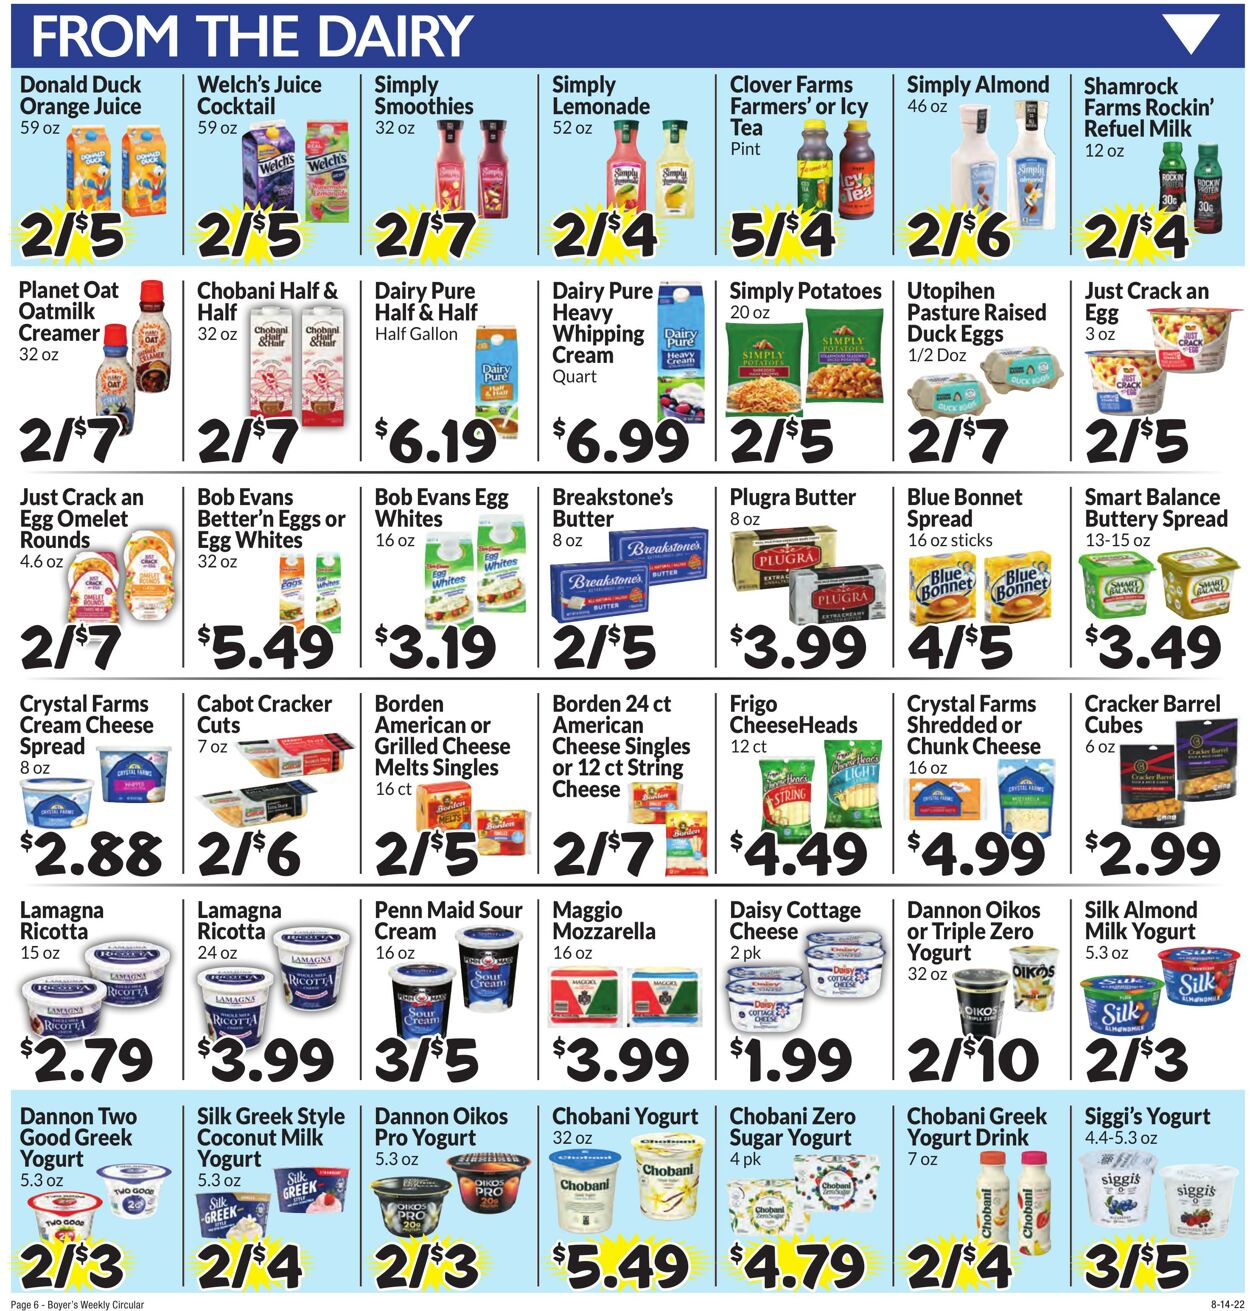 Weekly ad Boyer's 08/14/2022 - 08/20/2022